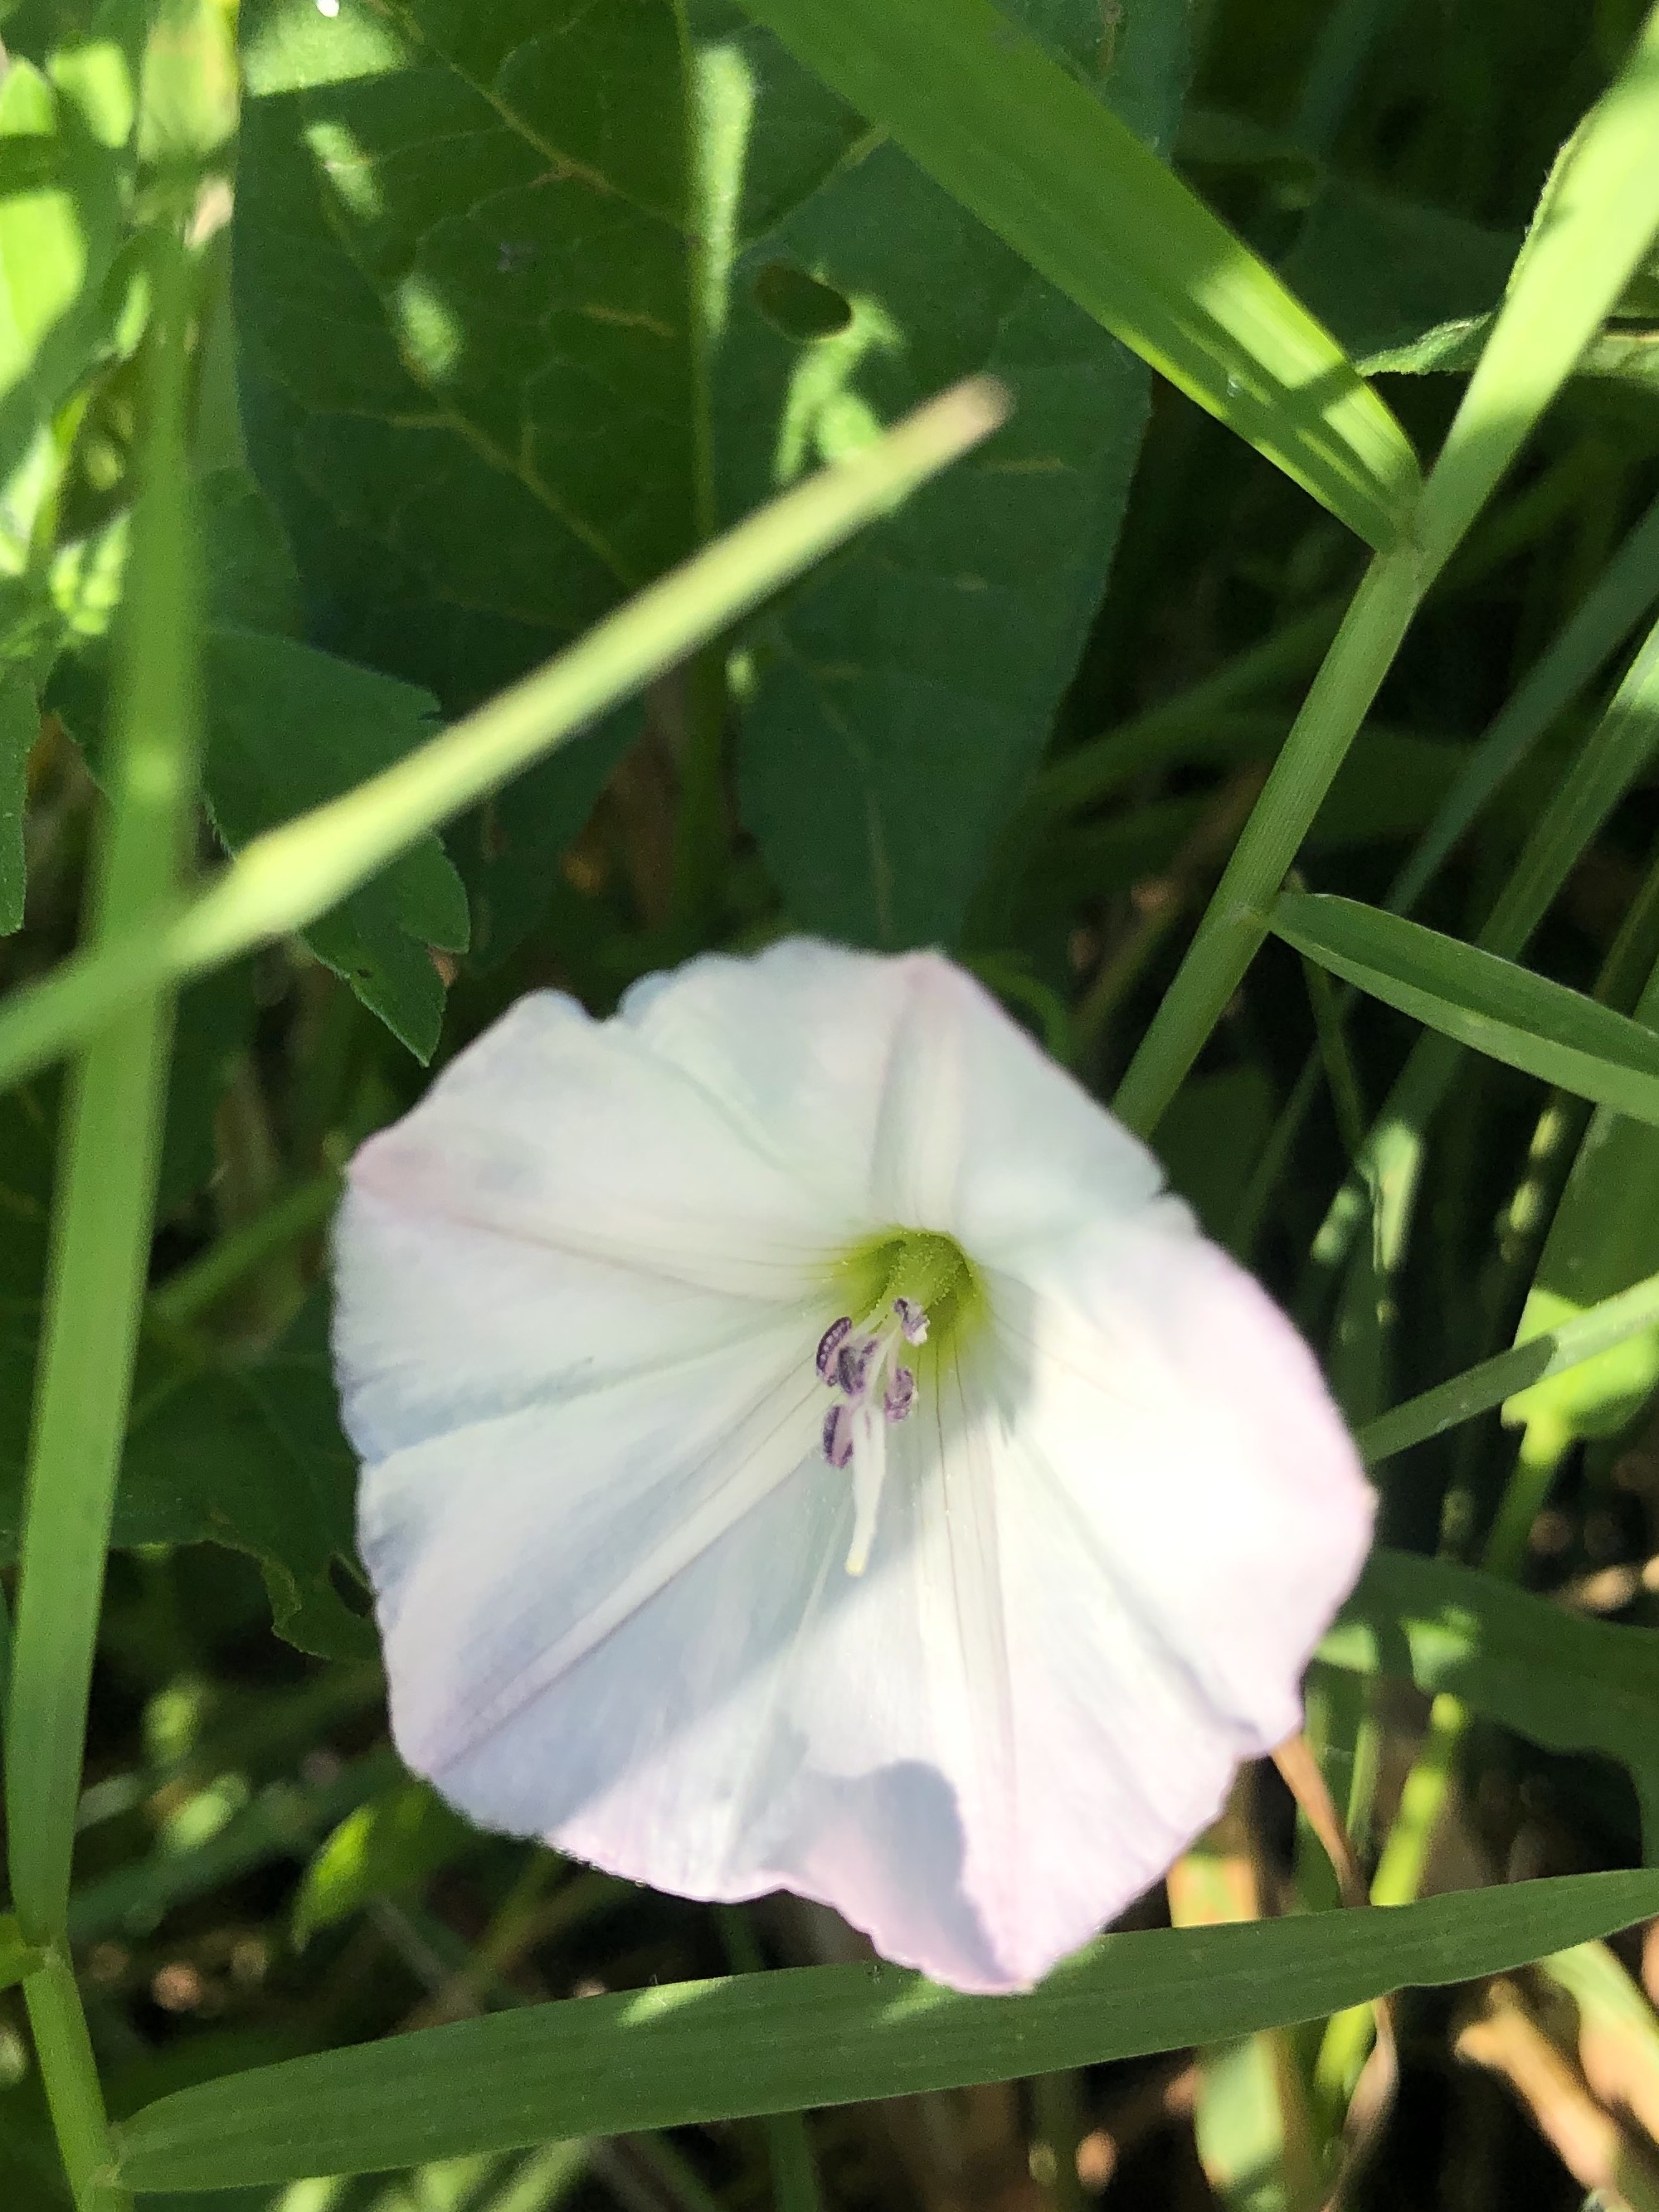 Field Bindweed on shore of Marion Dunn Pond in Madison, Wisconsin on June 11, 2021.